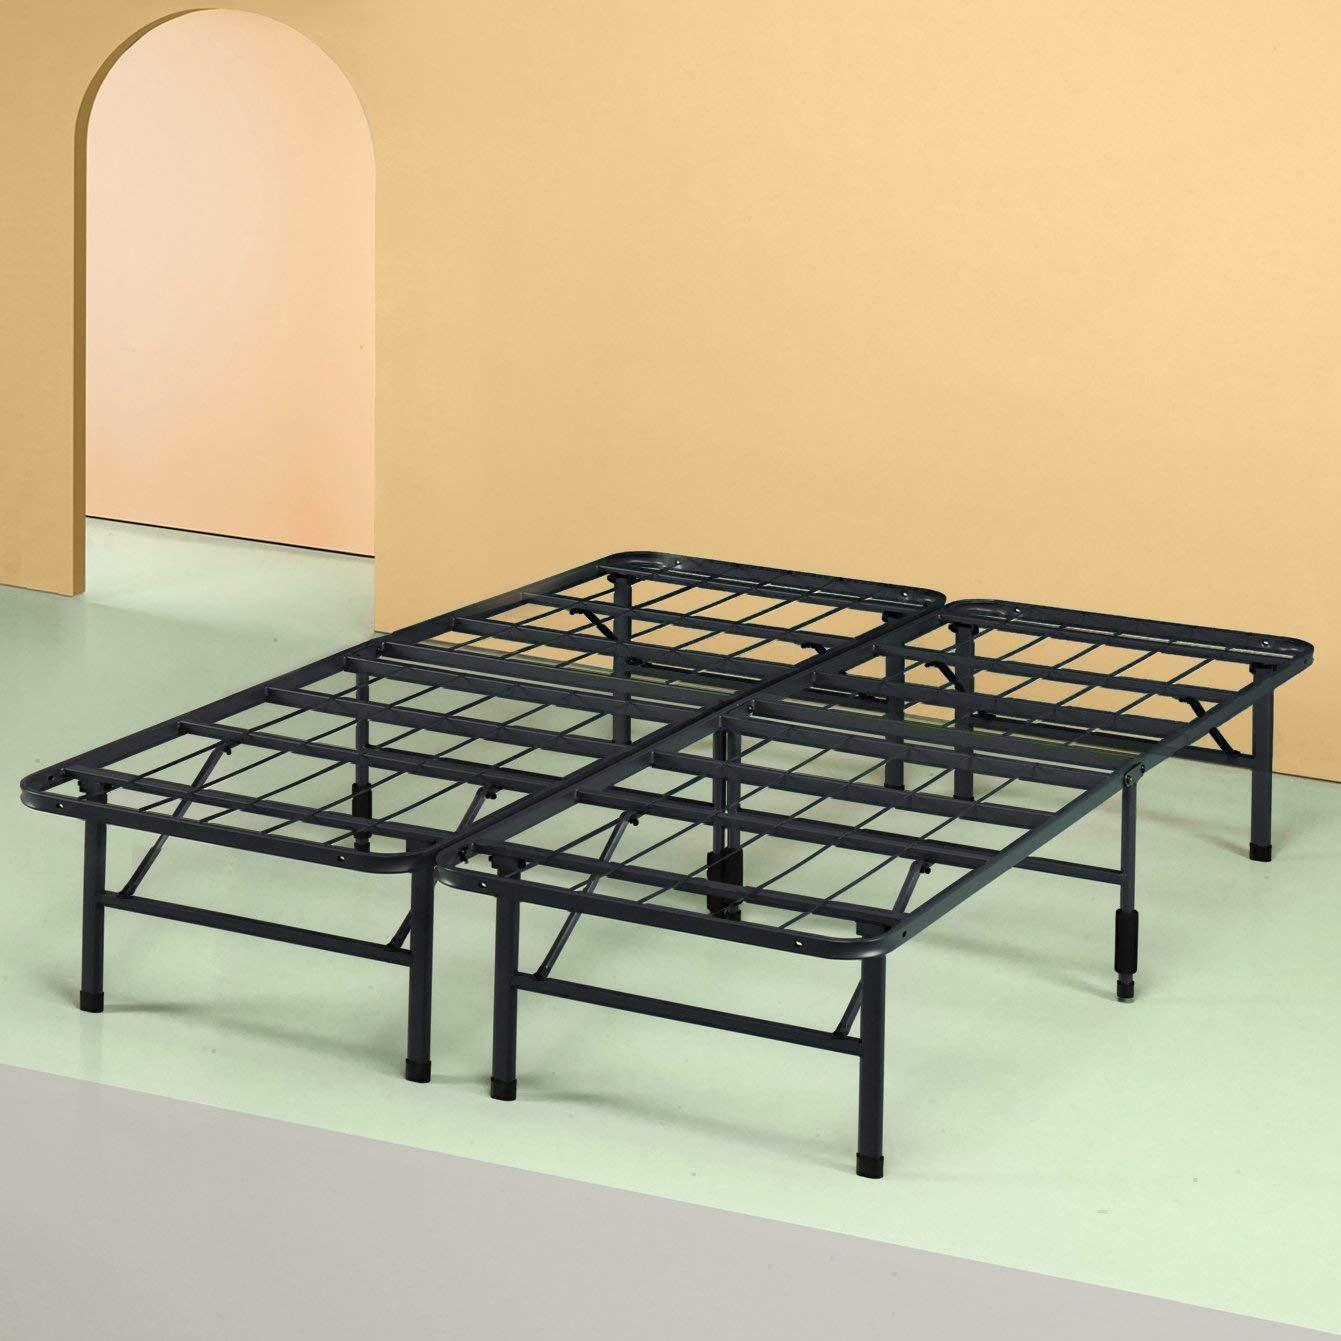 19 Best Metal Bed Frames 2020 The, How To Stabilize A Metal Bed Frame